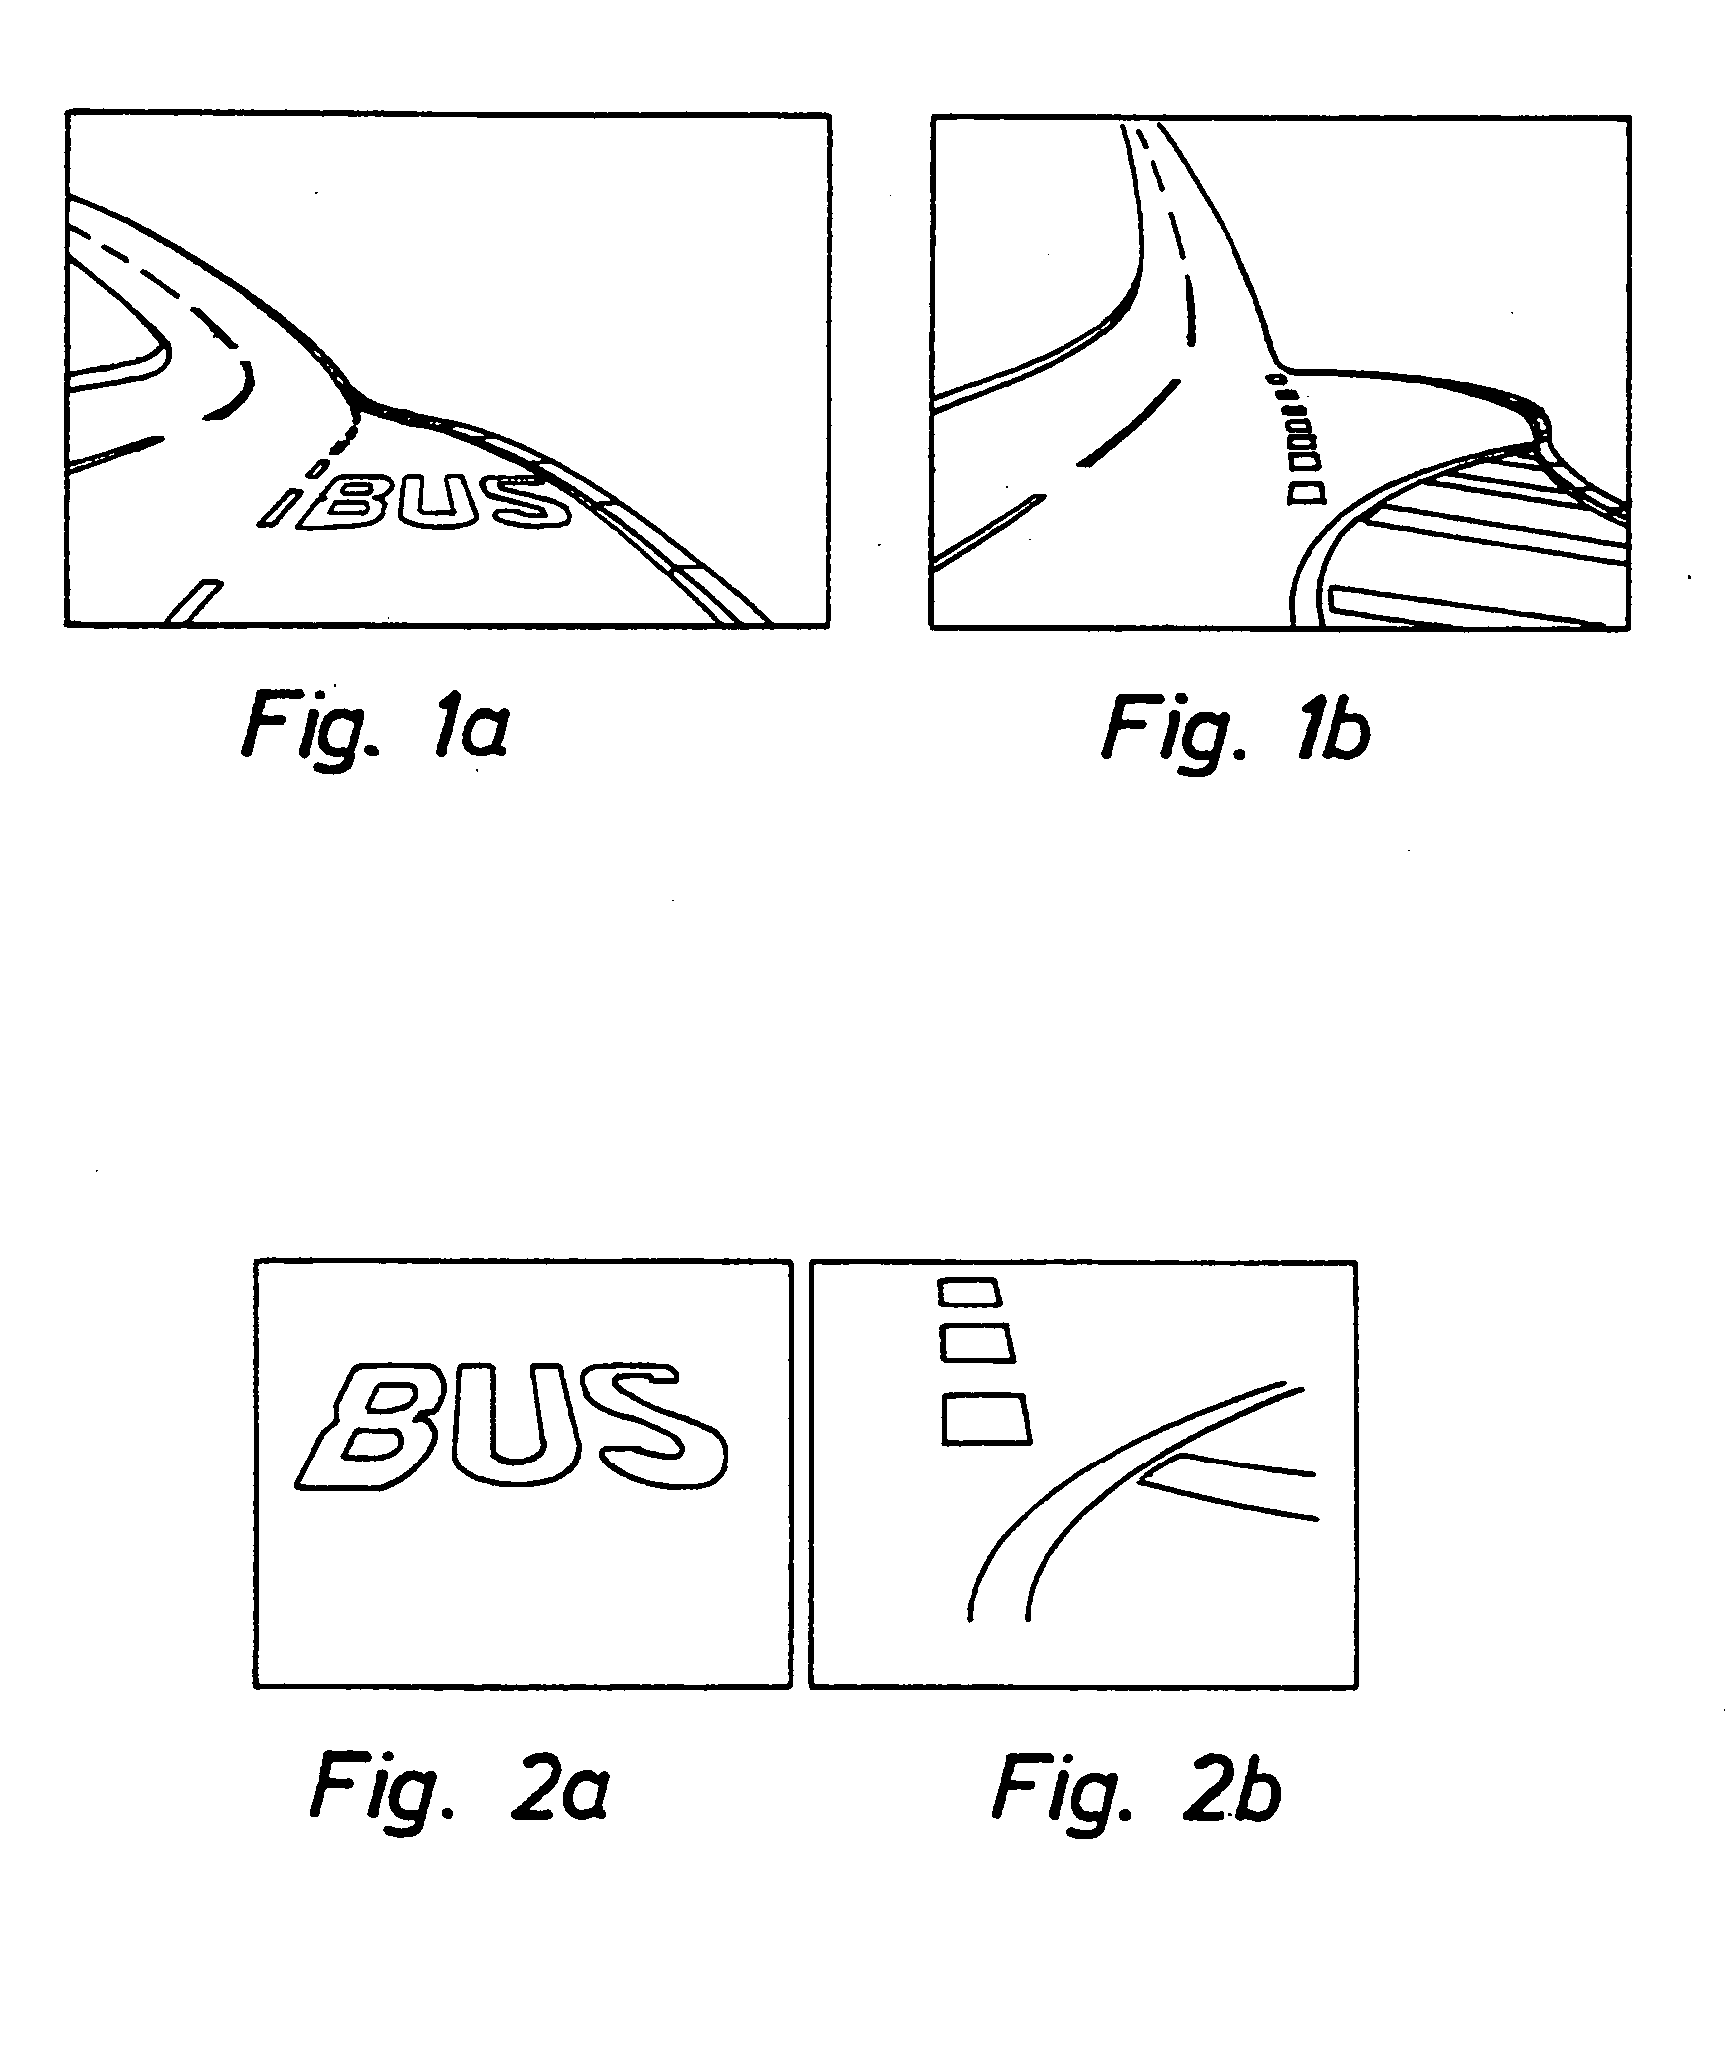 Camera based position recognition for a road vehicle